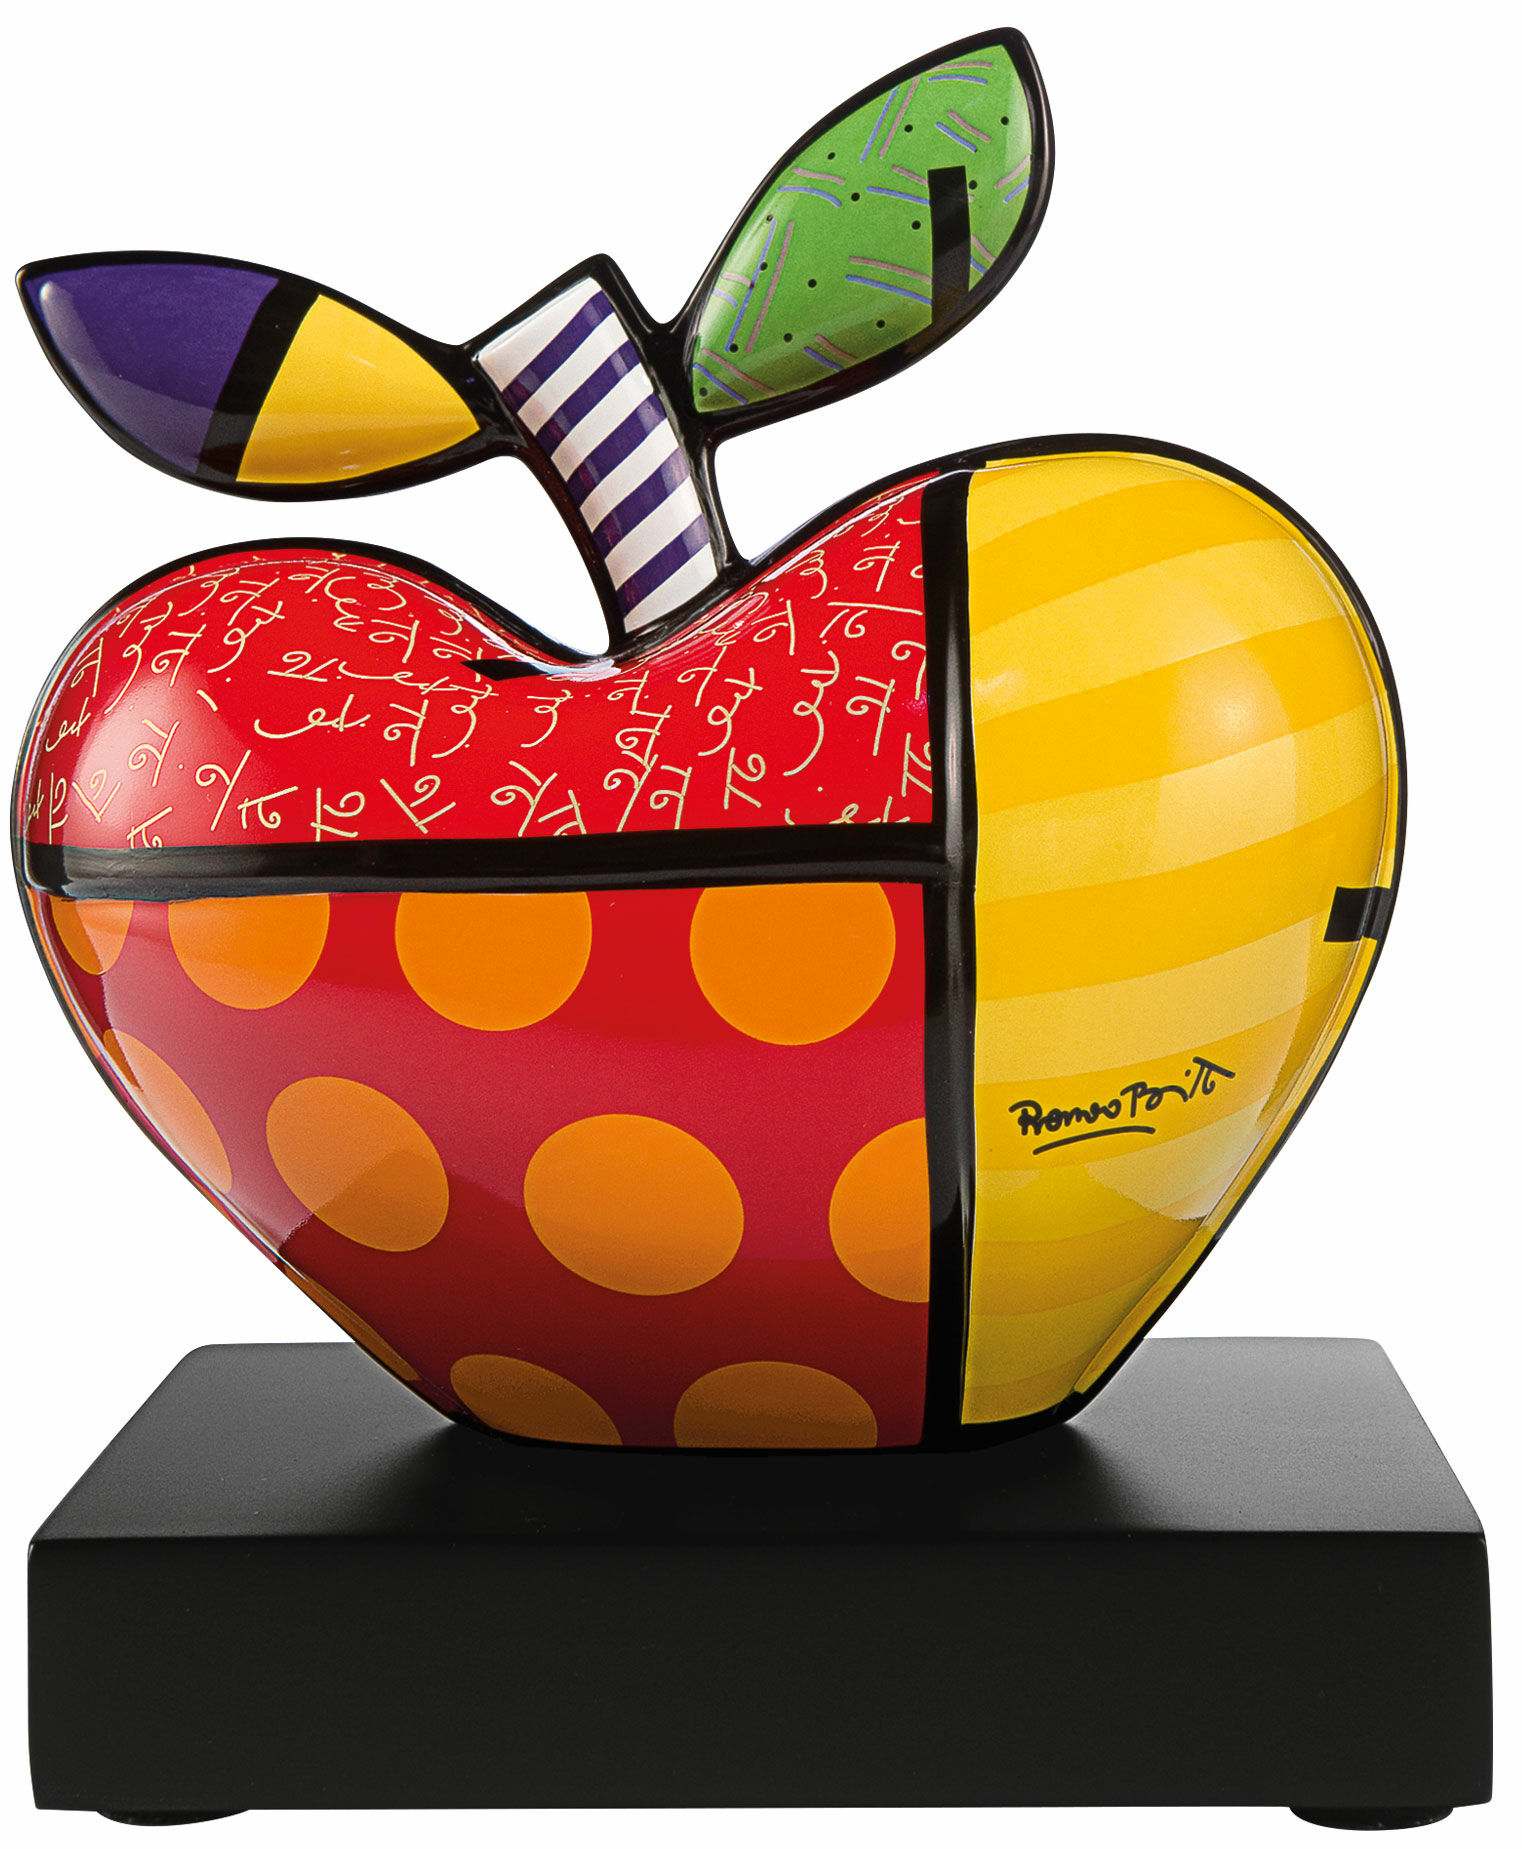 Porcelain object "Big Apple" (small version) by Romero Britto